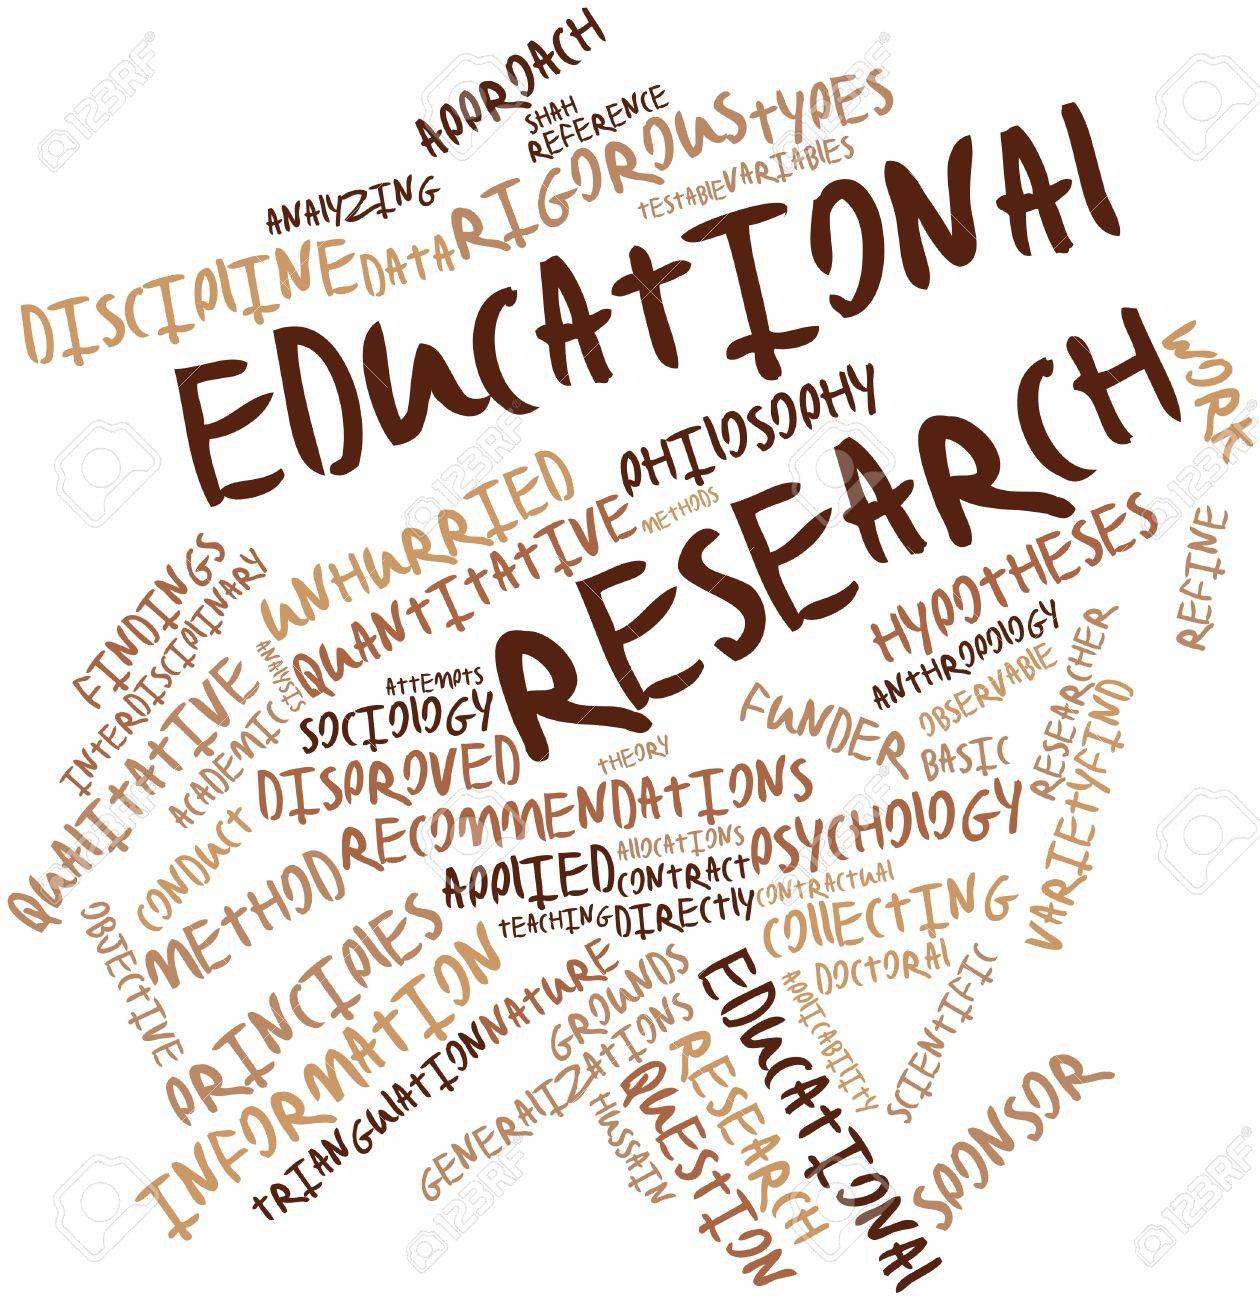 research and educational research